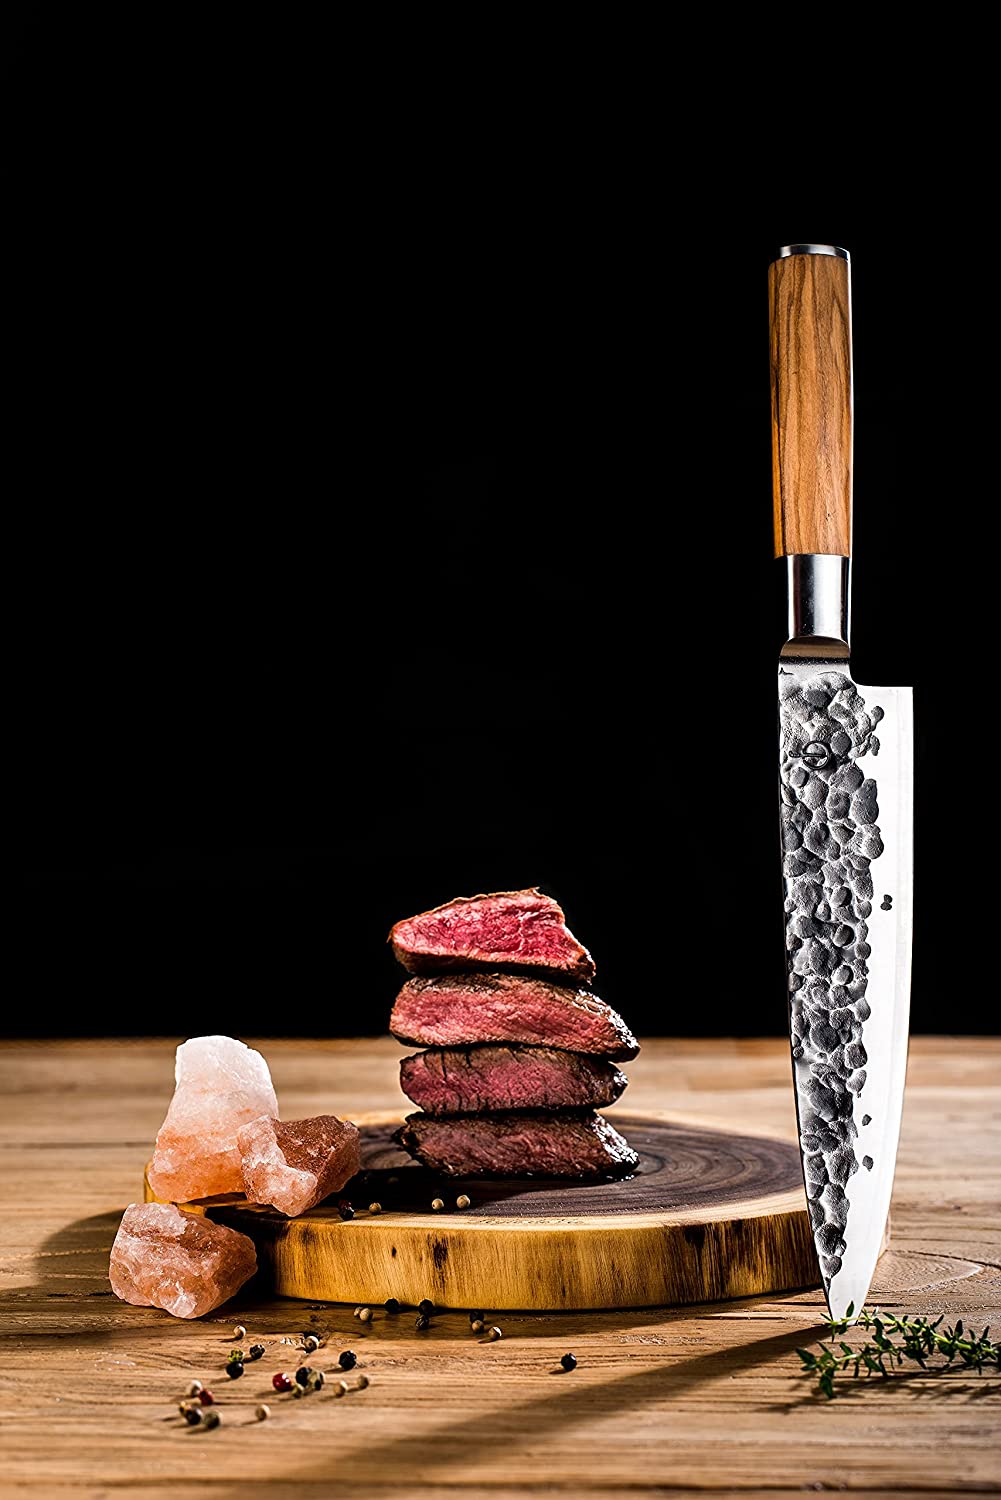 https://www.woklove.com/wp-content/uploads/2022/06/Forged-Olive-Chefs-knife-meat.jpg